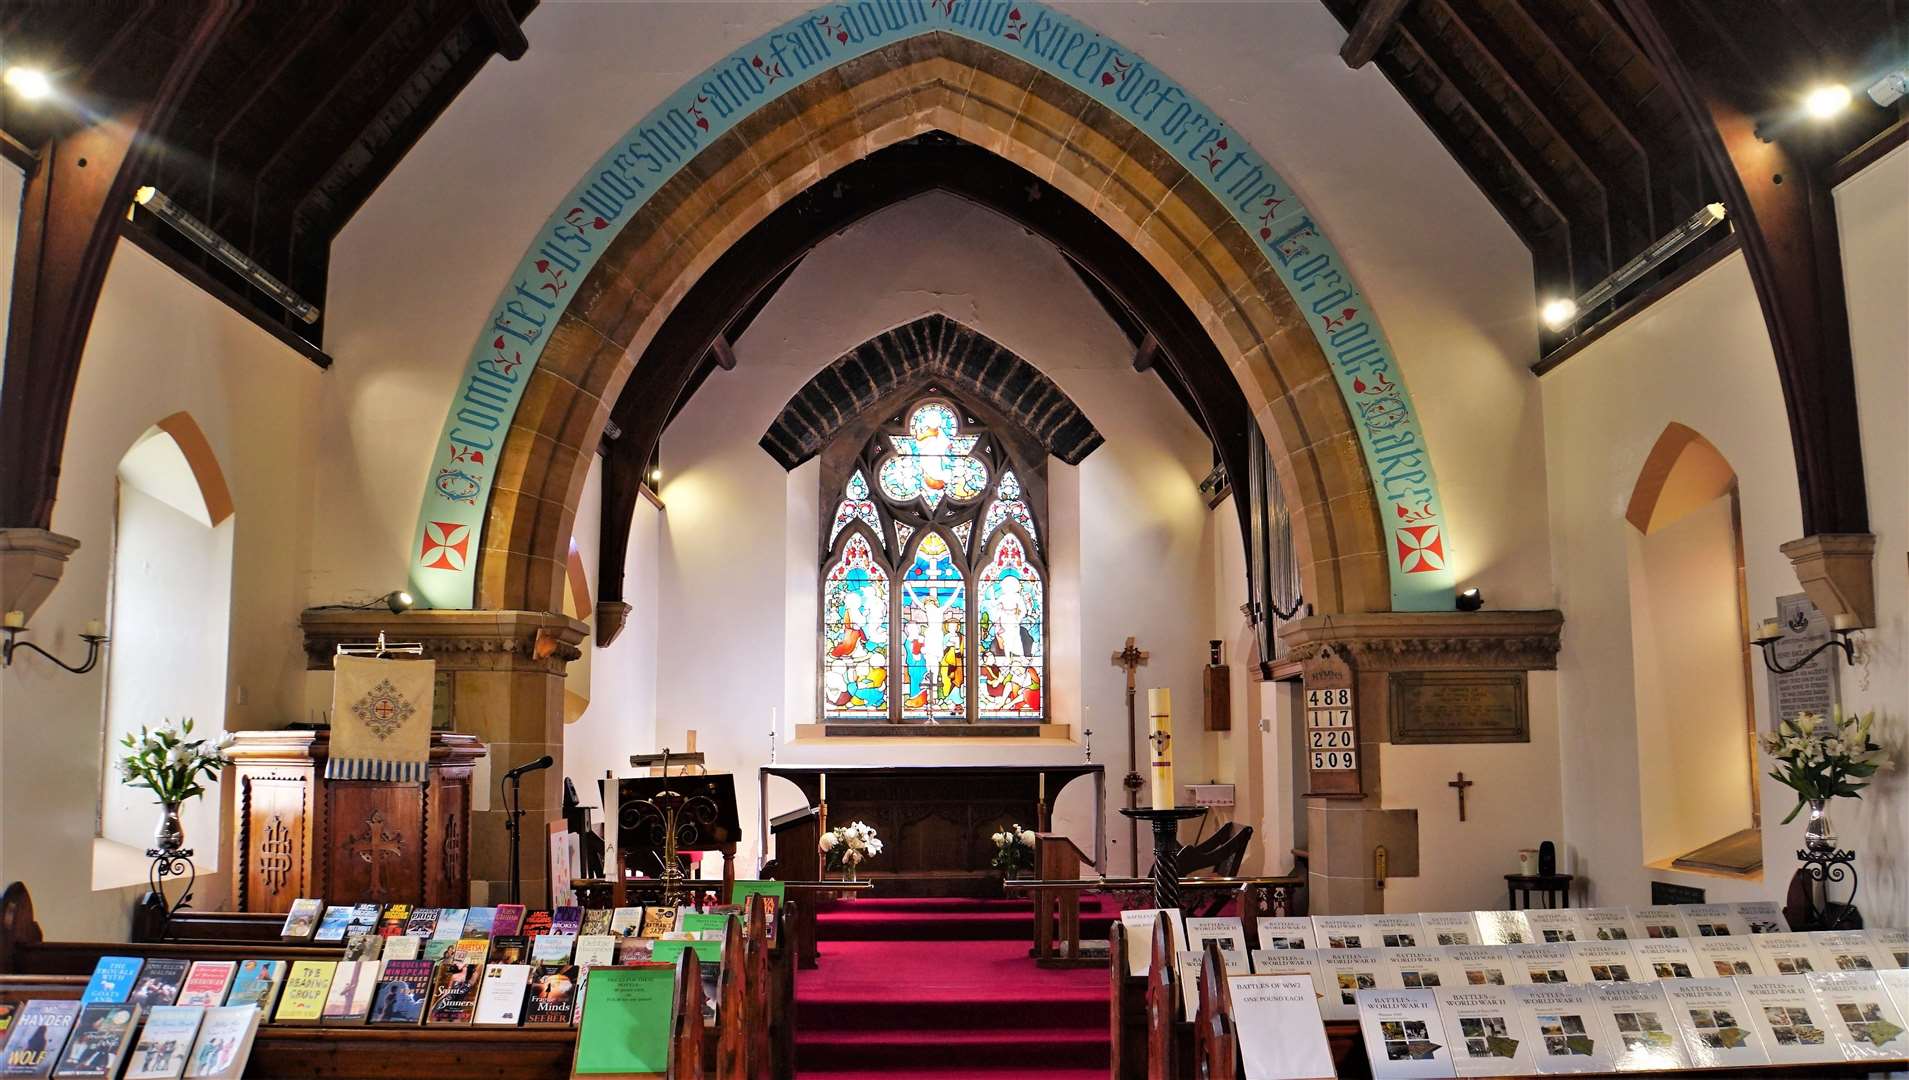 The beautiful interior of St John's church. Picture: DGS